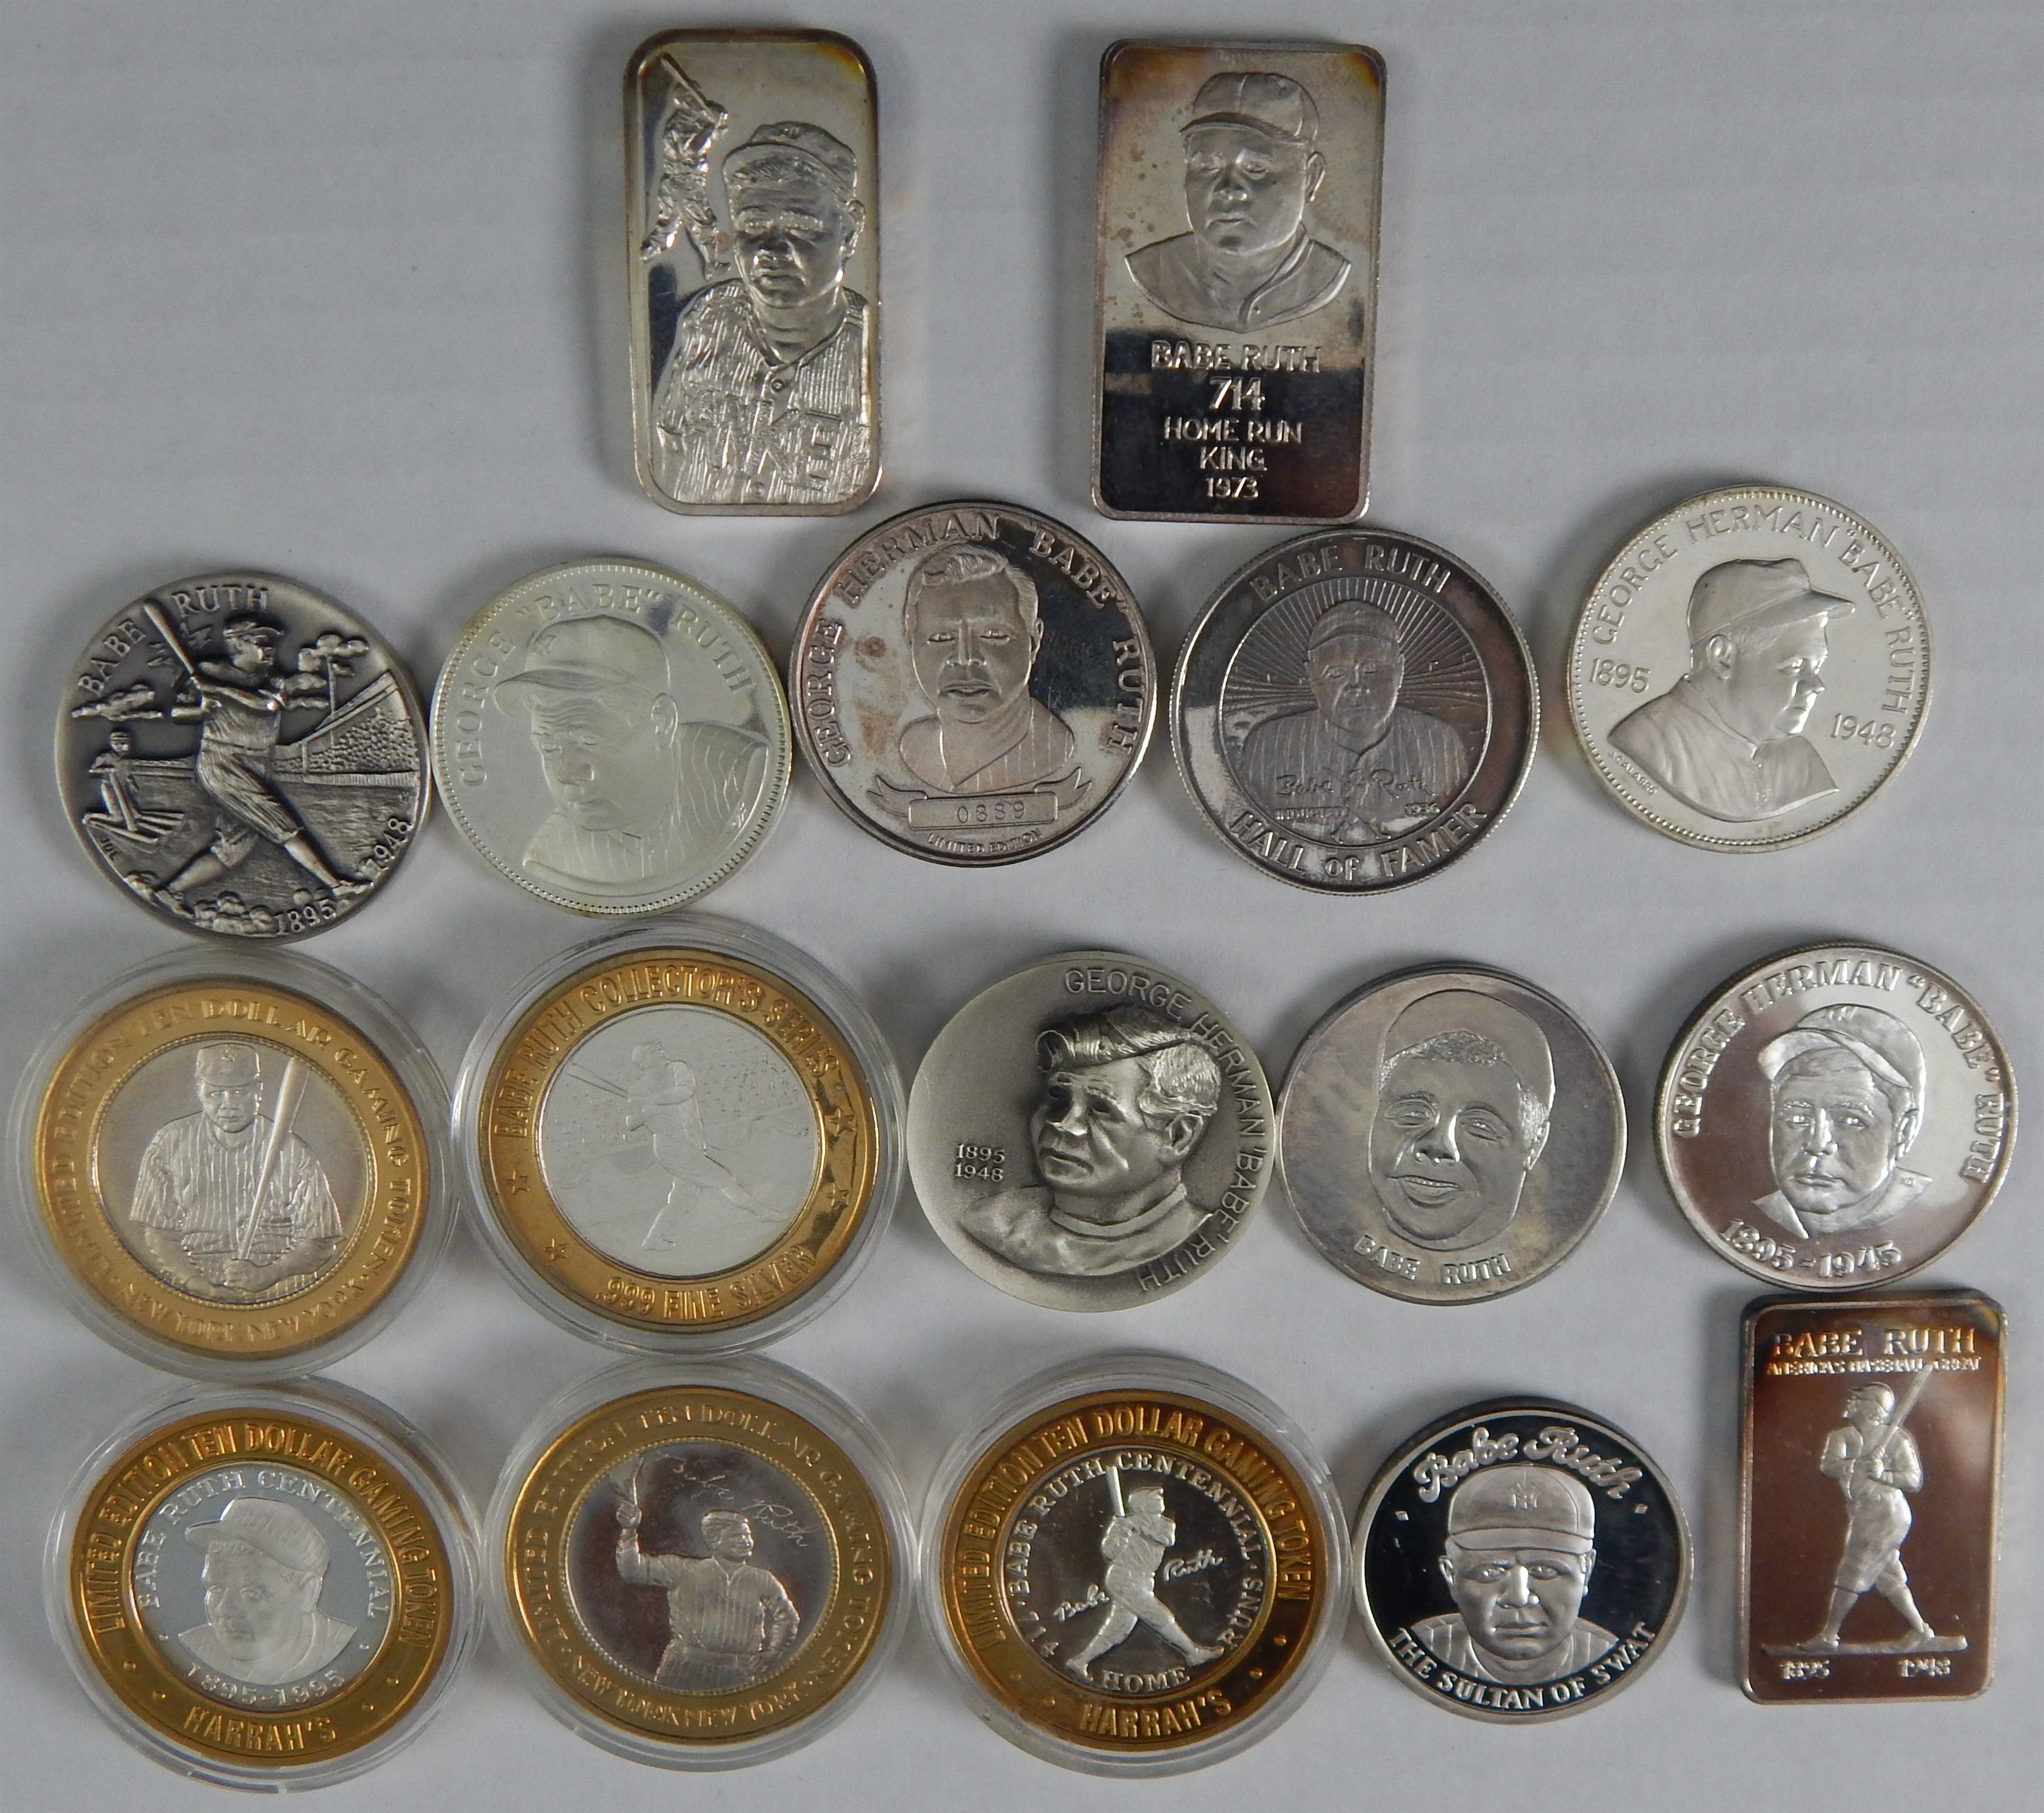 Ruth and Gehrig - Collection of Babe Ruth One Troy Ounce .999 Silver Coins (17)